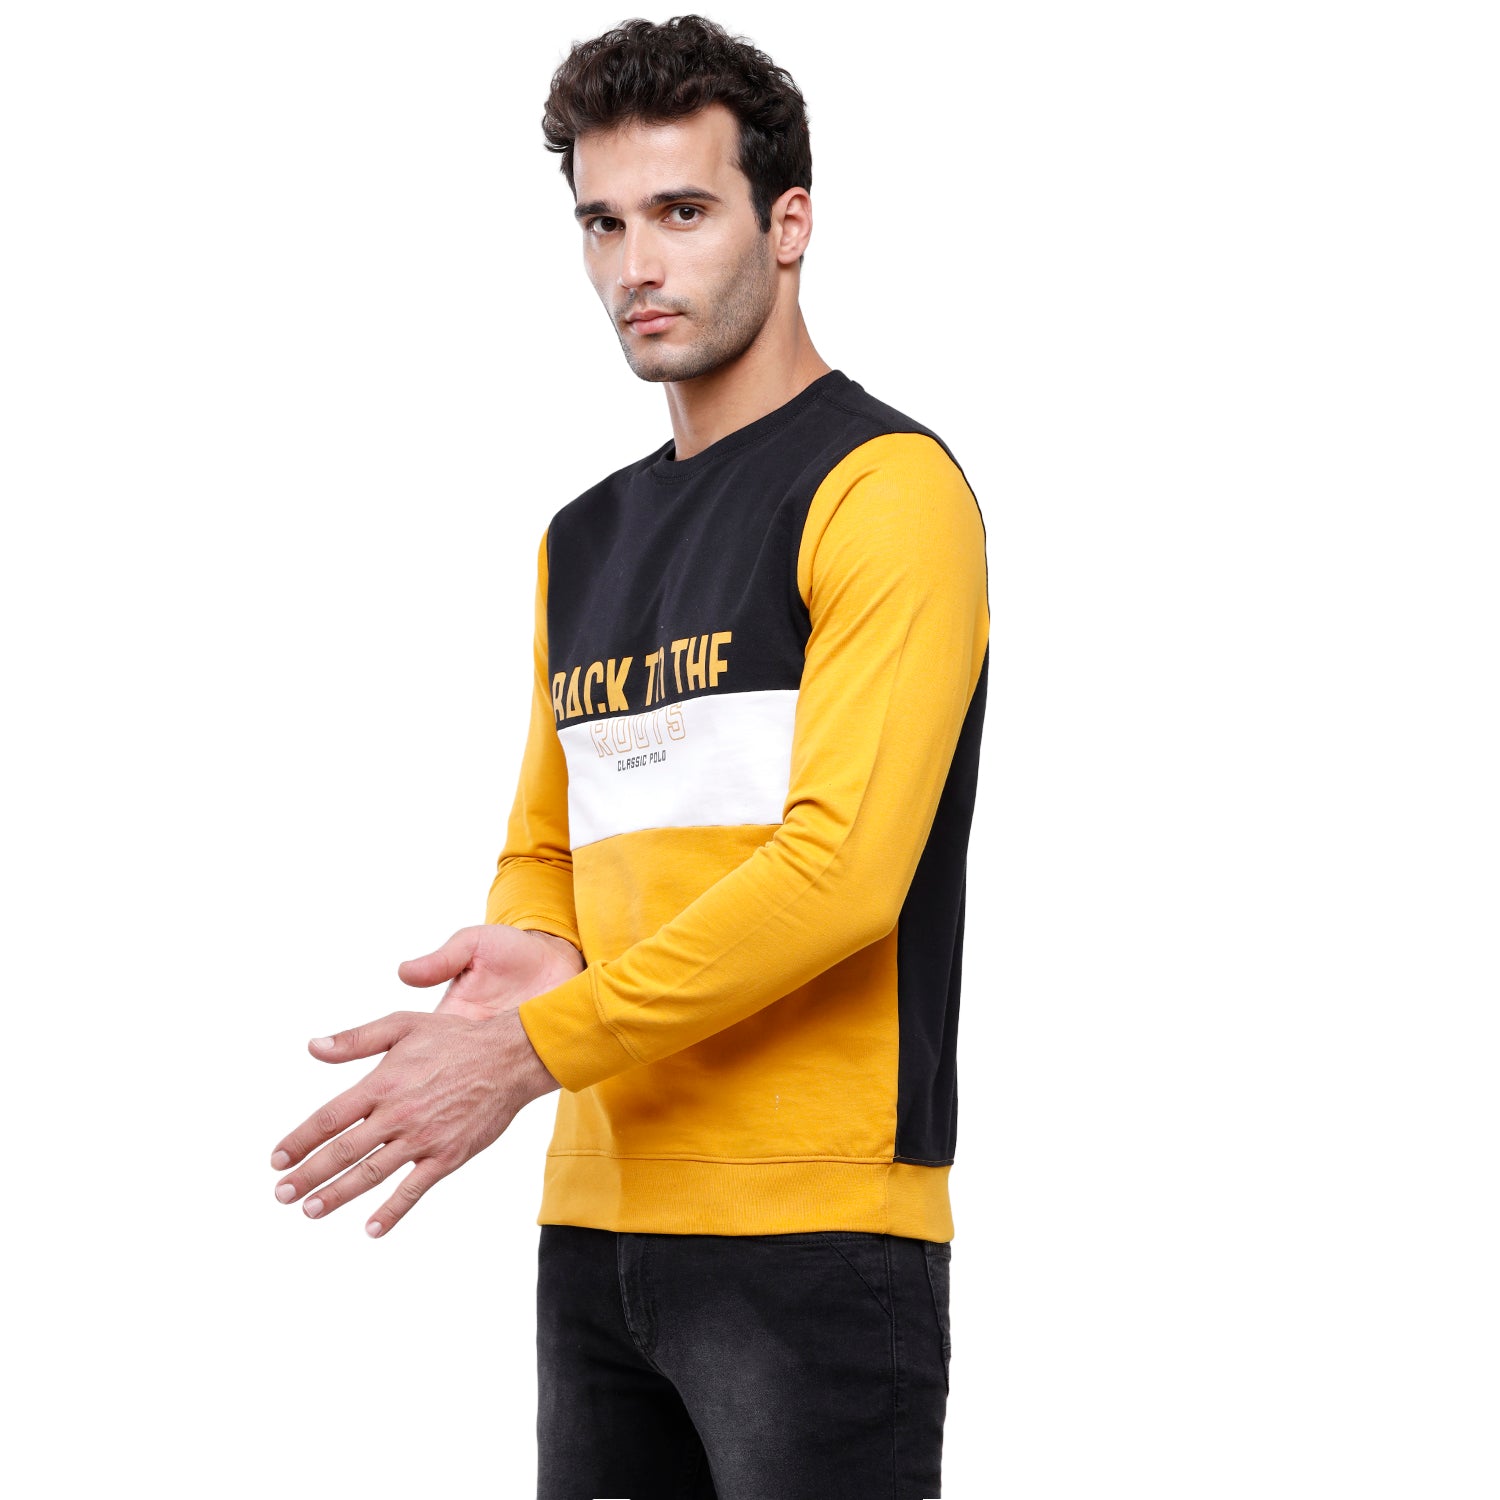 Classic Polo Men's Color Block Full Sleeve Navy & Yellow Sweat Shirt - CPSS-314 B Sweat Shirts Classic Polo 